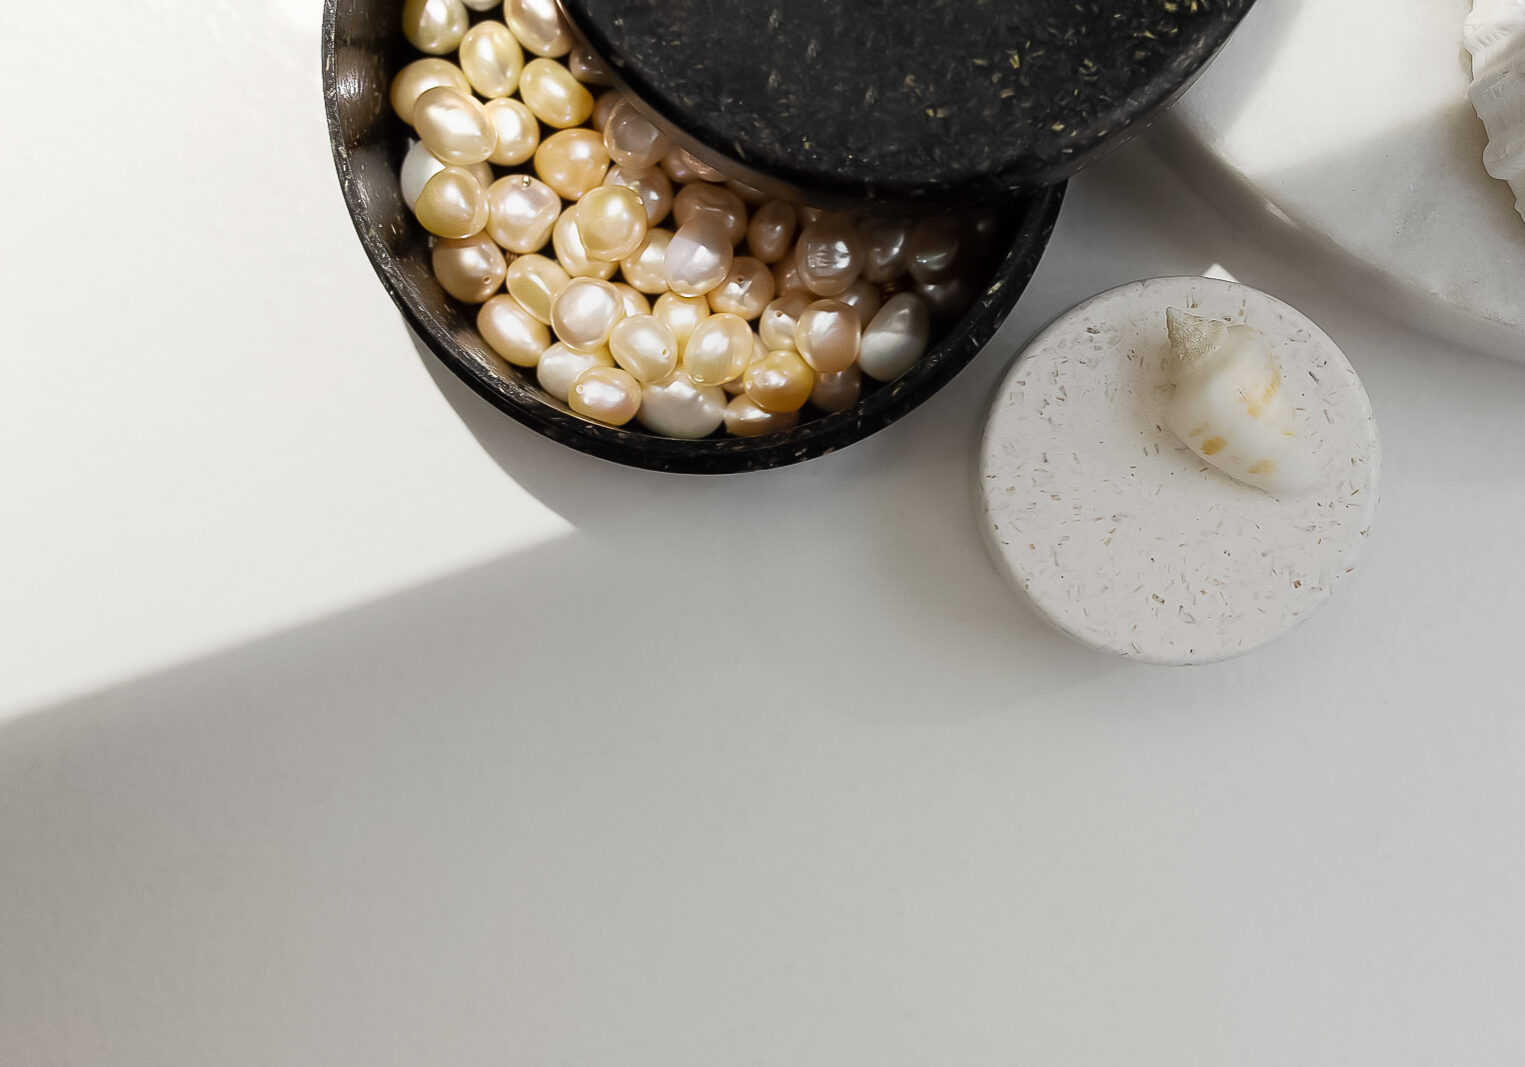 Premium product photo of a biodegradable jewellery box full of real ocean pearls in different colors.